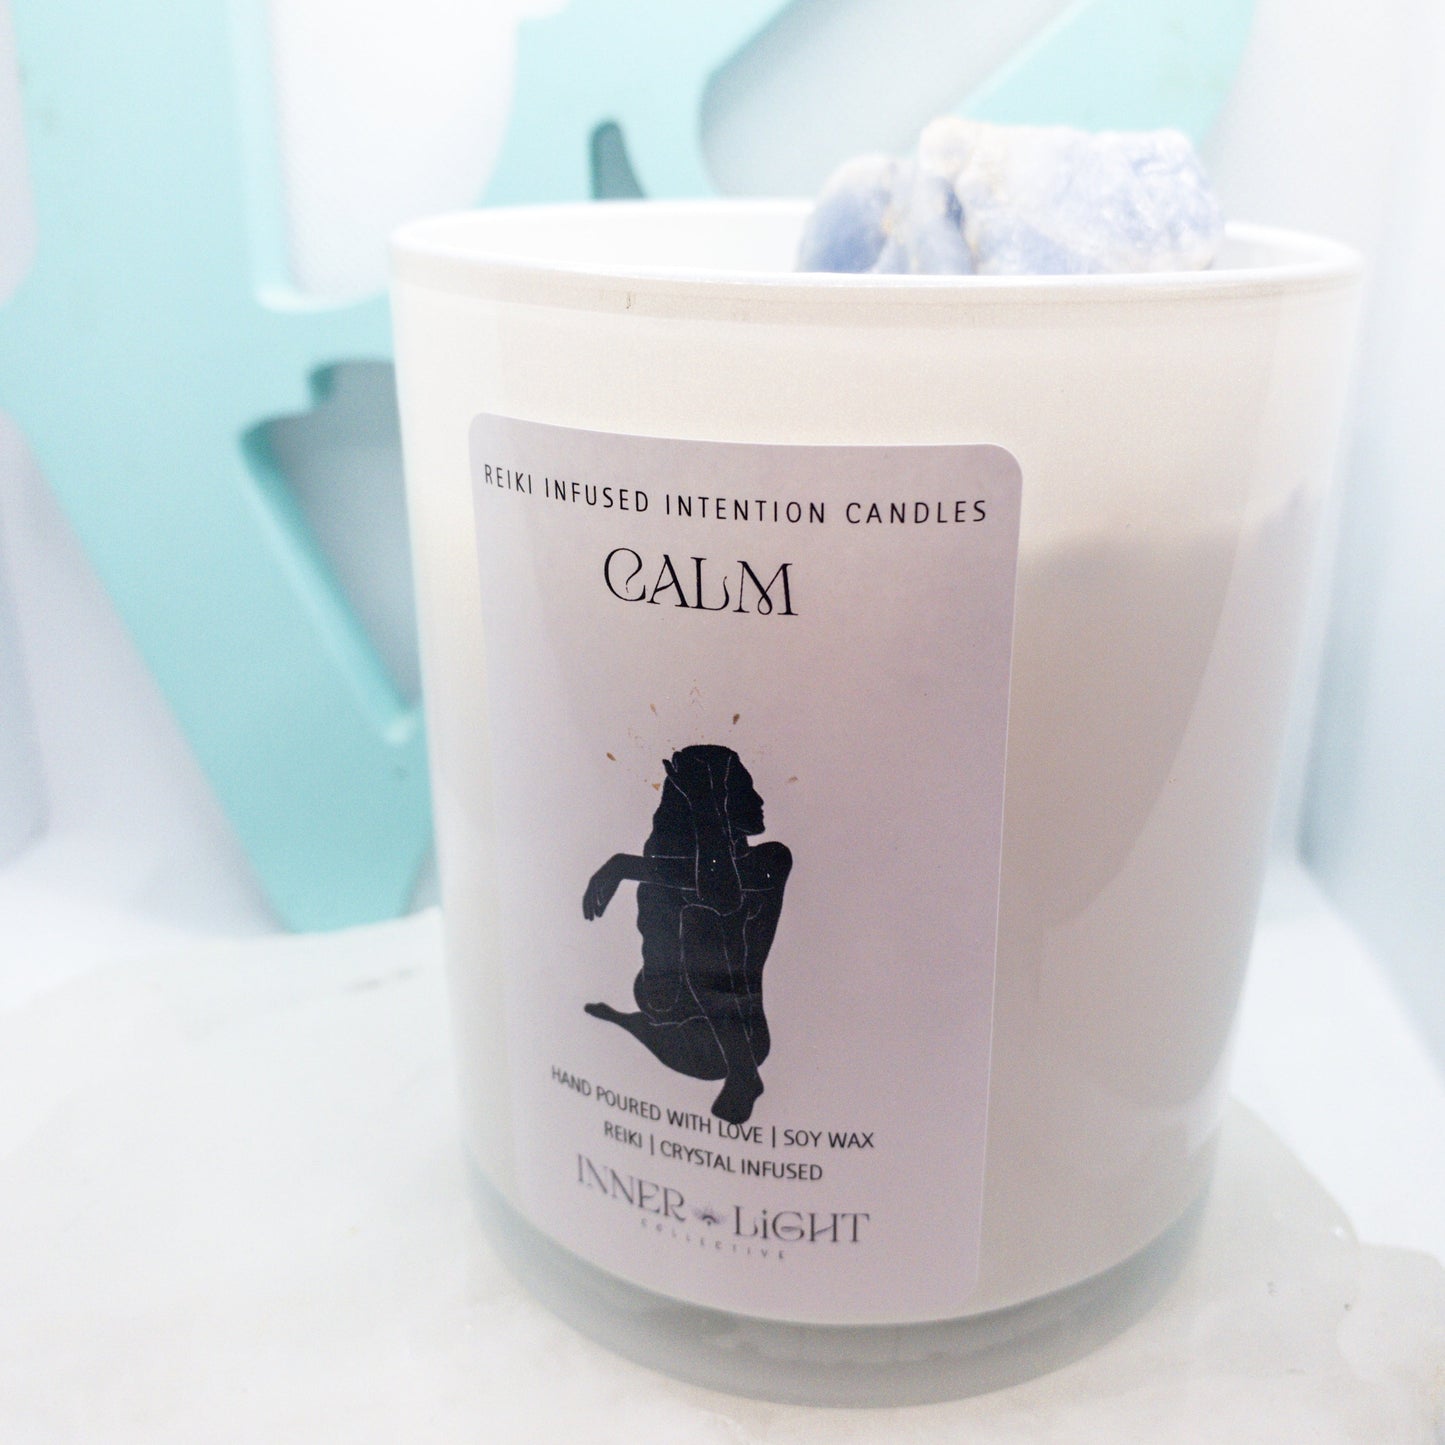 Calm - Reiki + Crystal Infused Candle